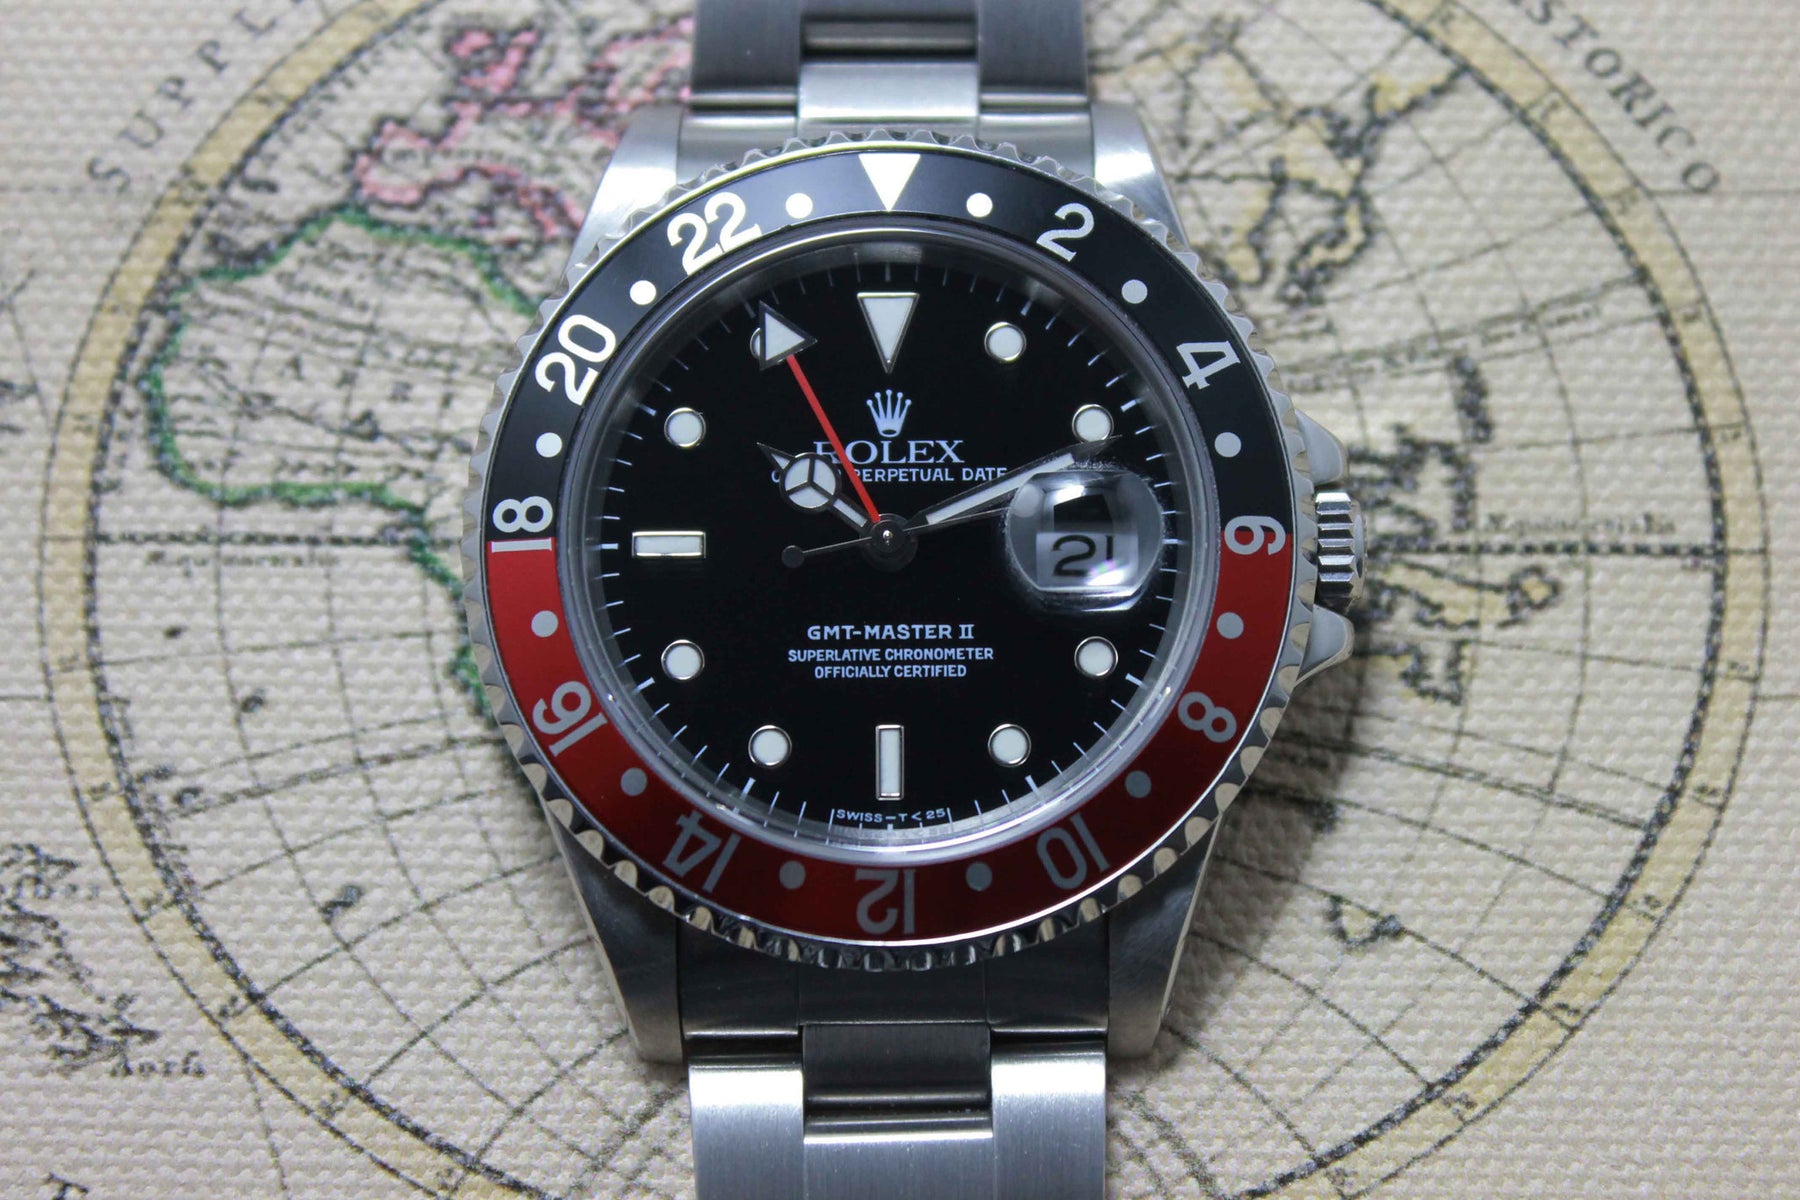 1990 - Rolex GMT Master II (box, RSC papers and booklets) - Momentum Dubai